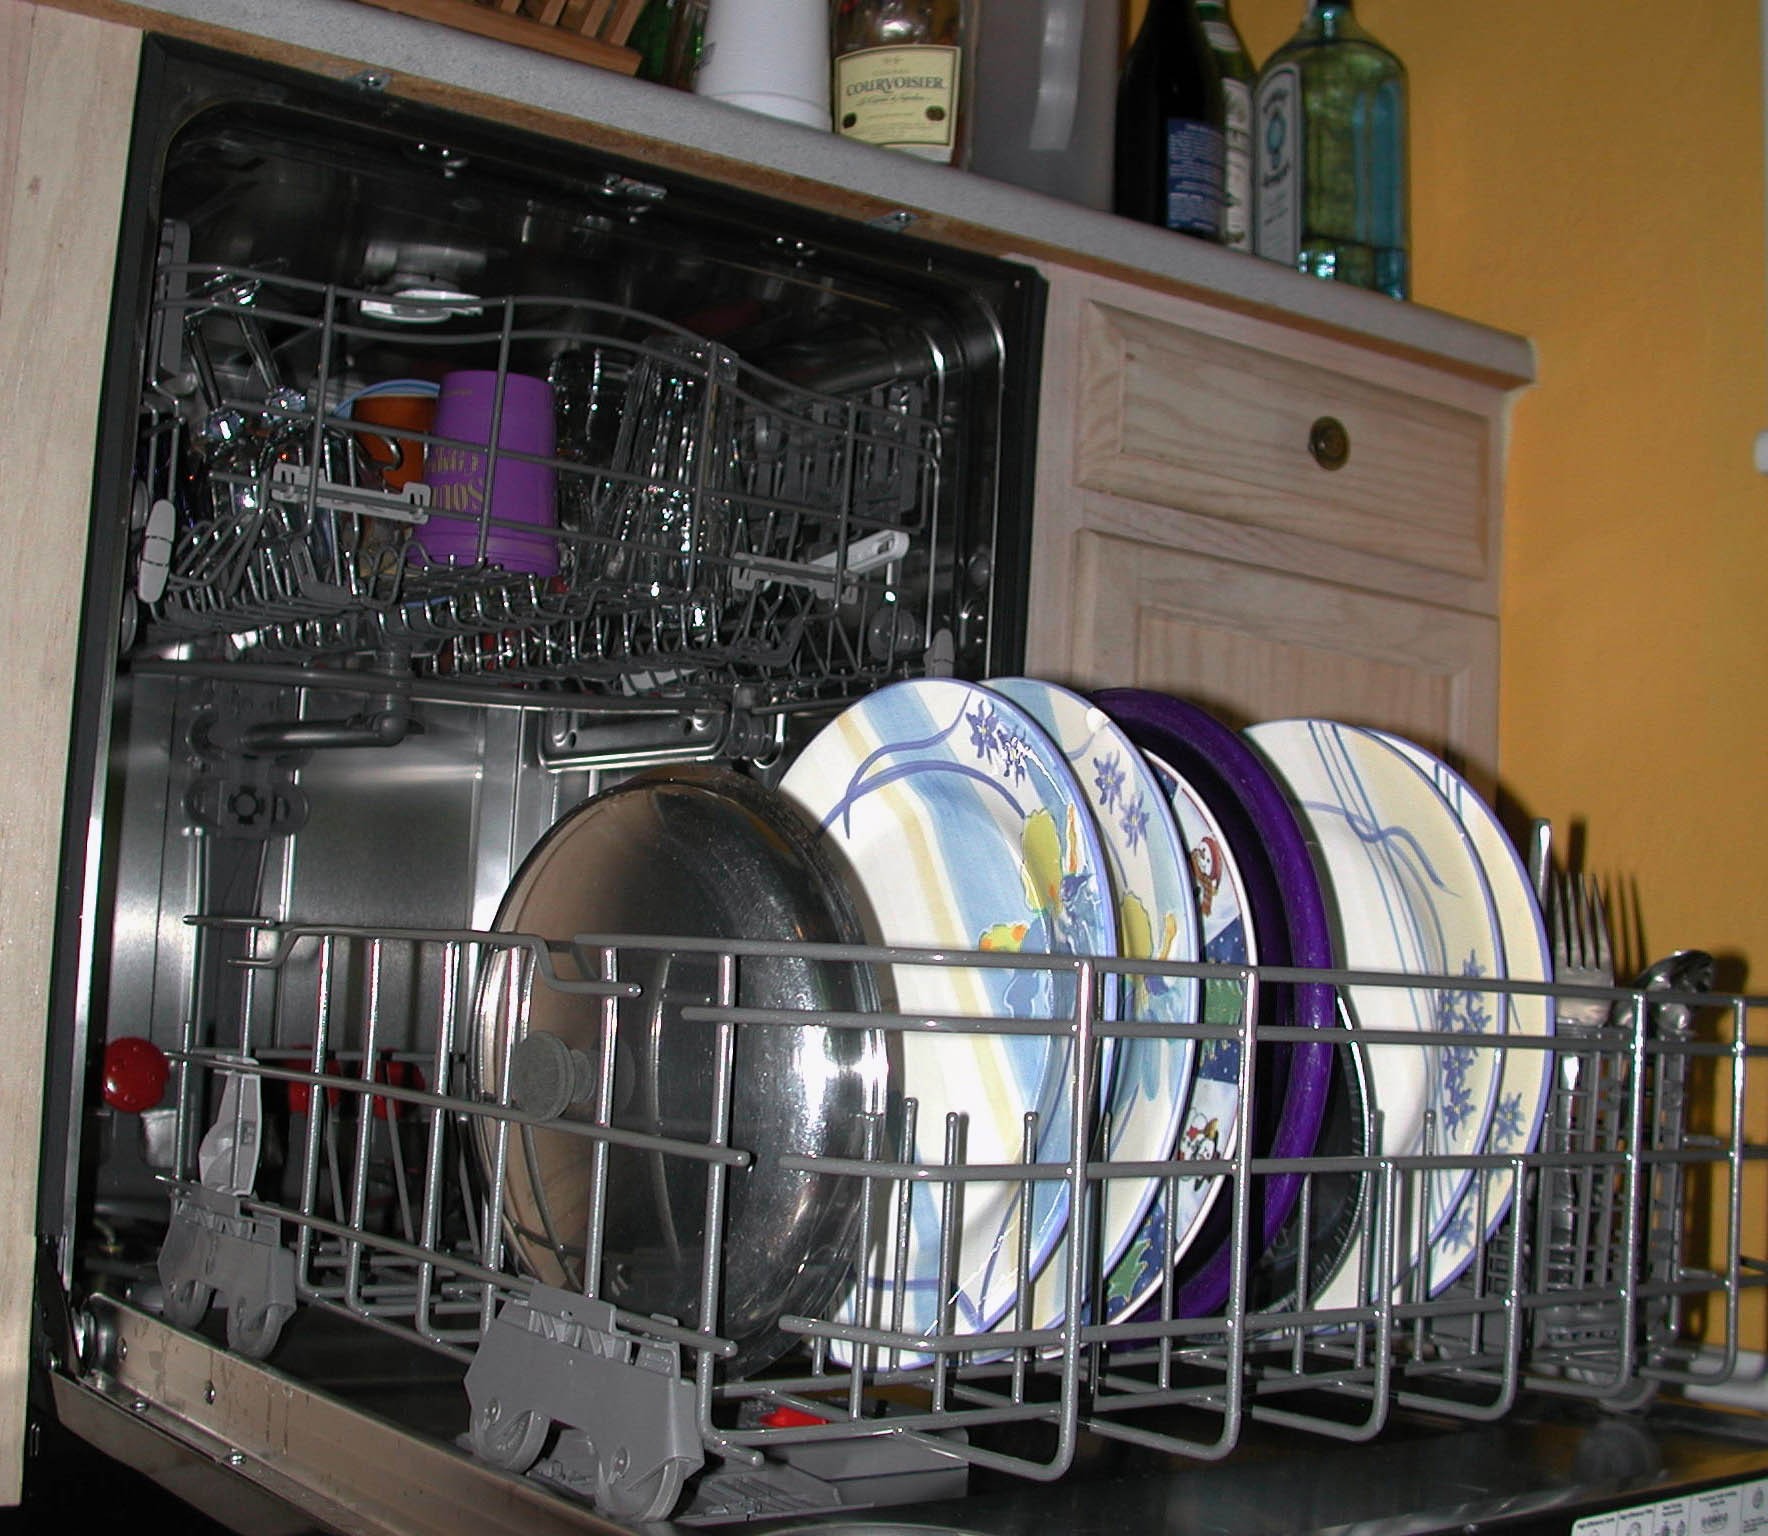 What Should You Do If You Accidentally Put Dish Soap In Dishwasher?